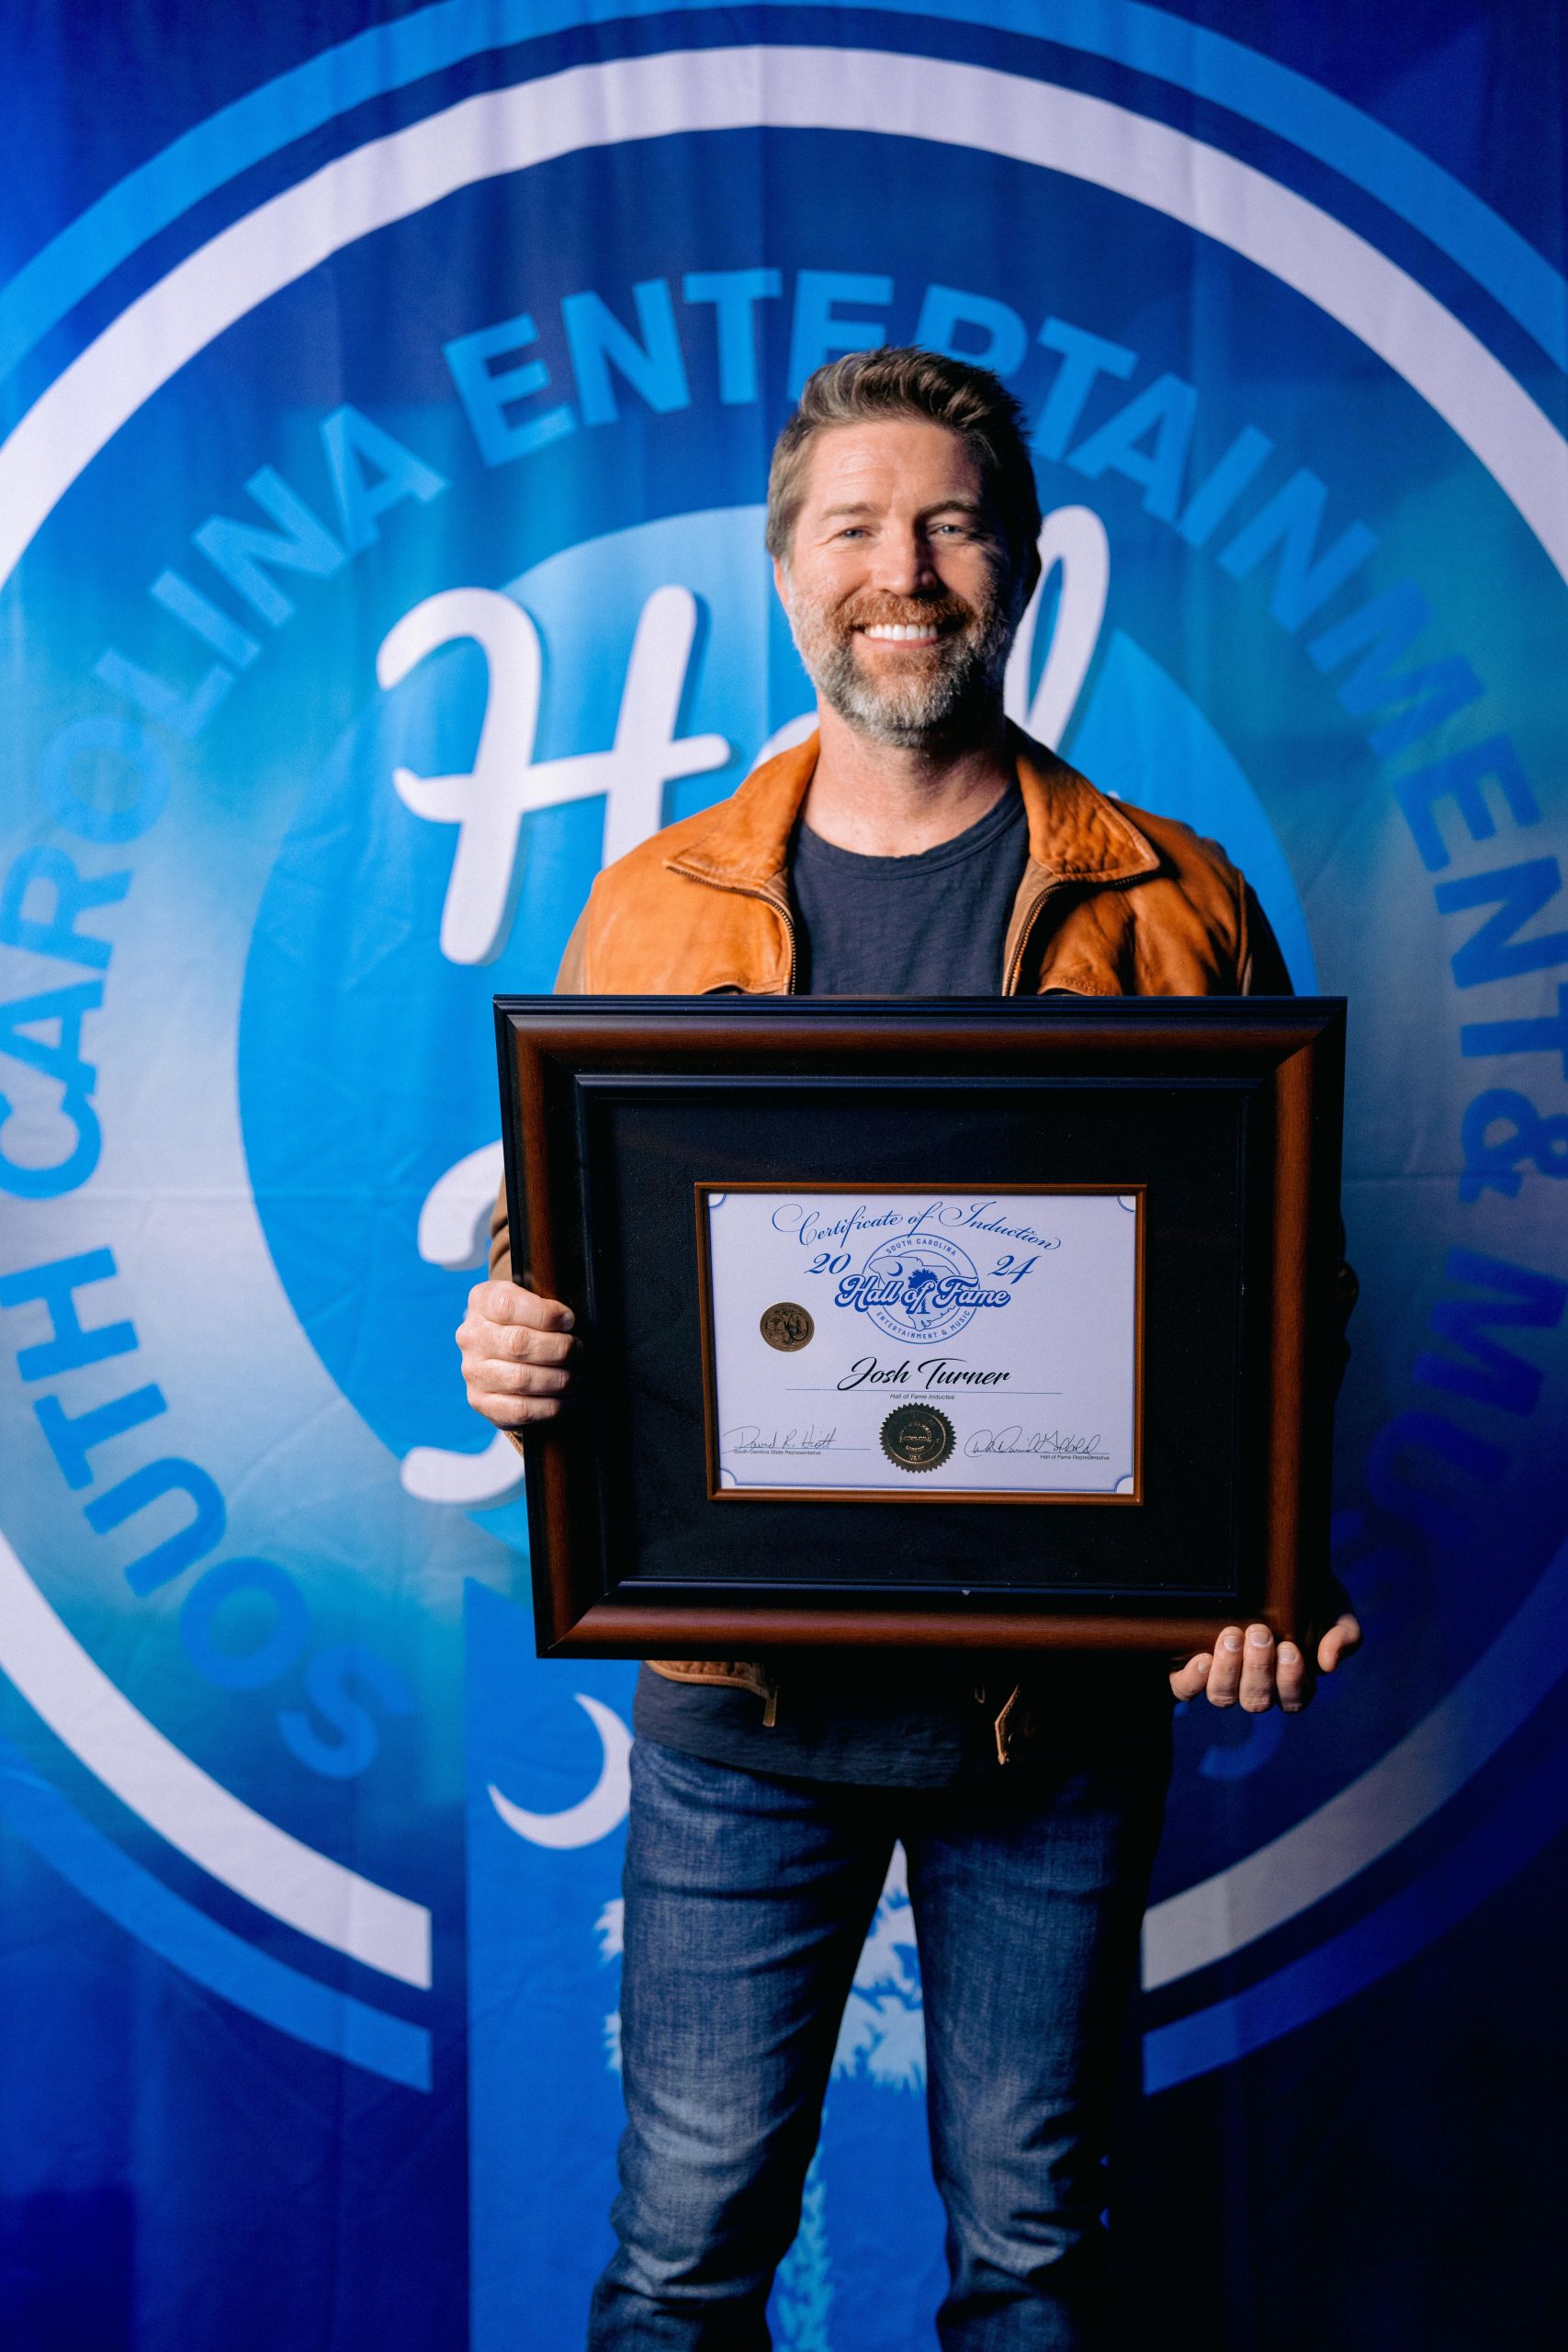 JOSH TURNER INDUCTED INTO THE SOUTH CAROLINA ENTERTAINMENT AND MUSIC HALL OF FAME